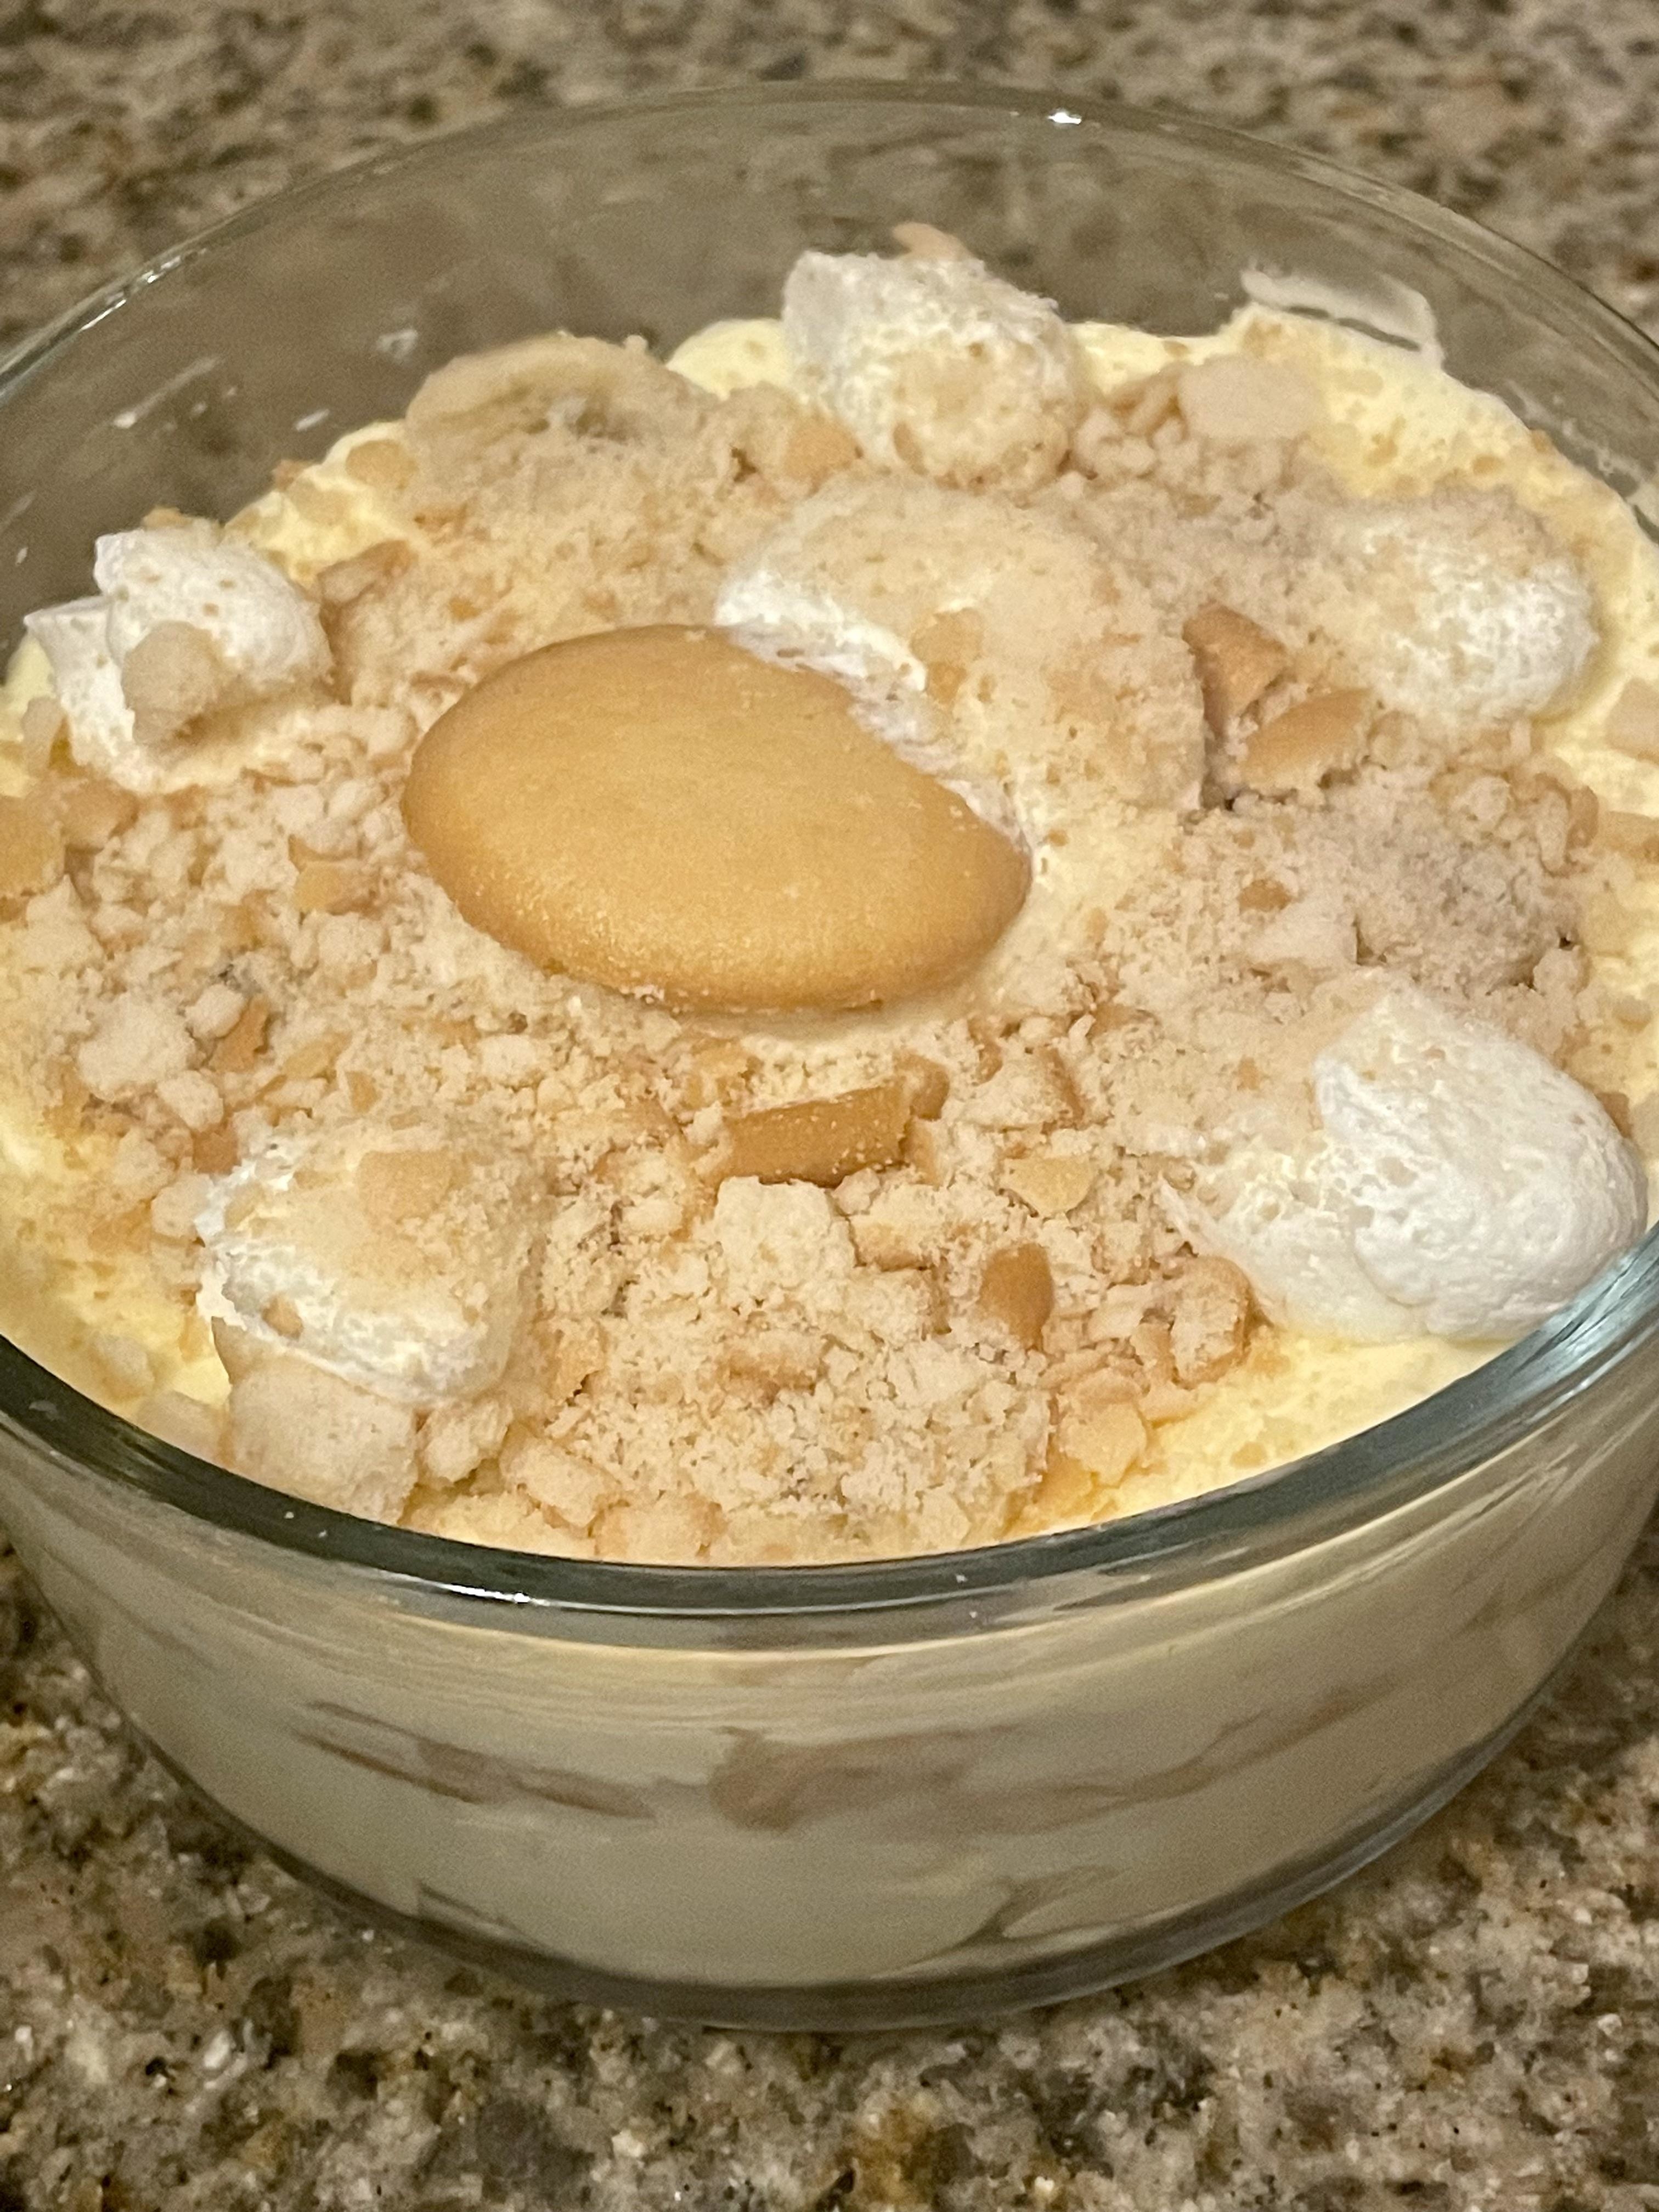 Banana pudding in a large glass bowl